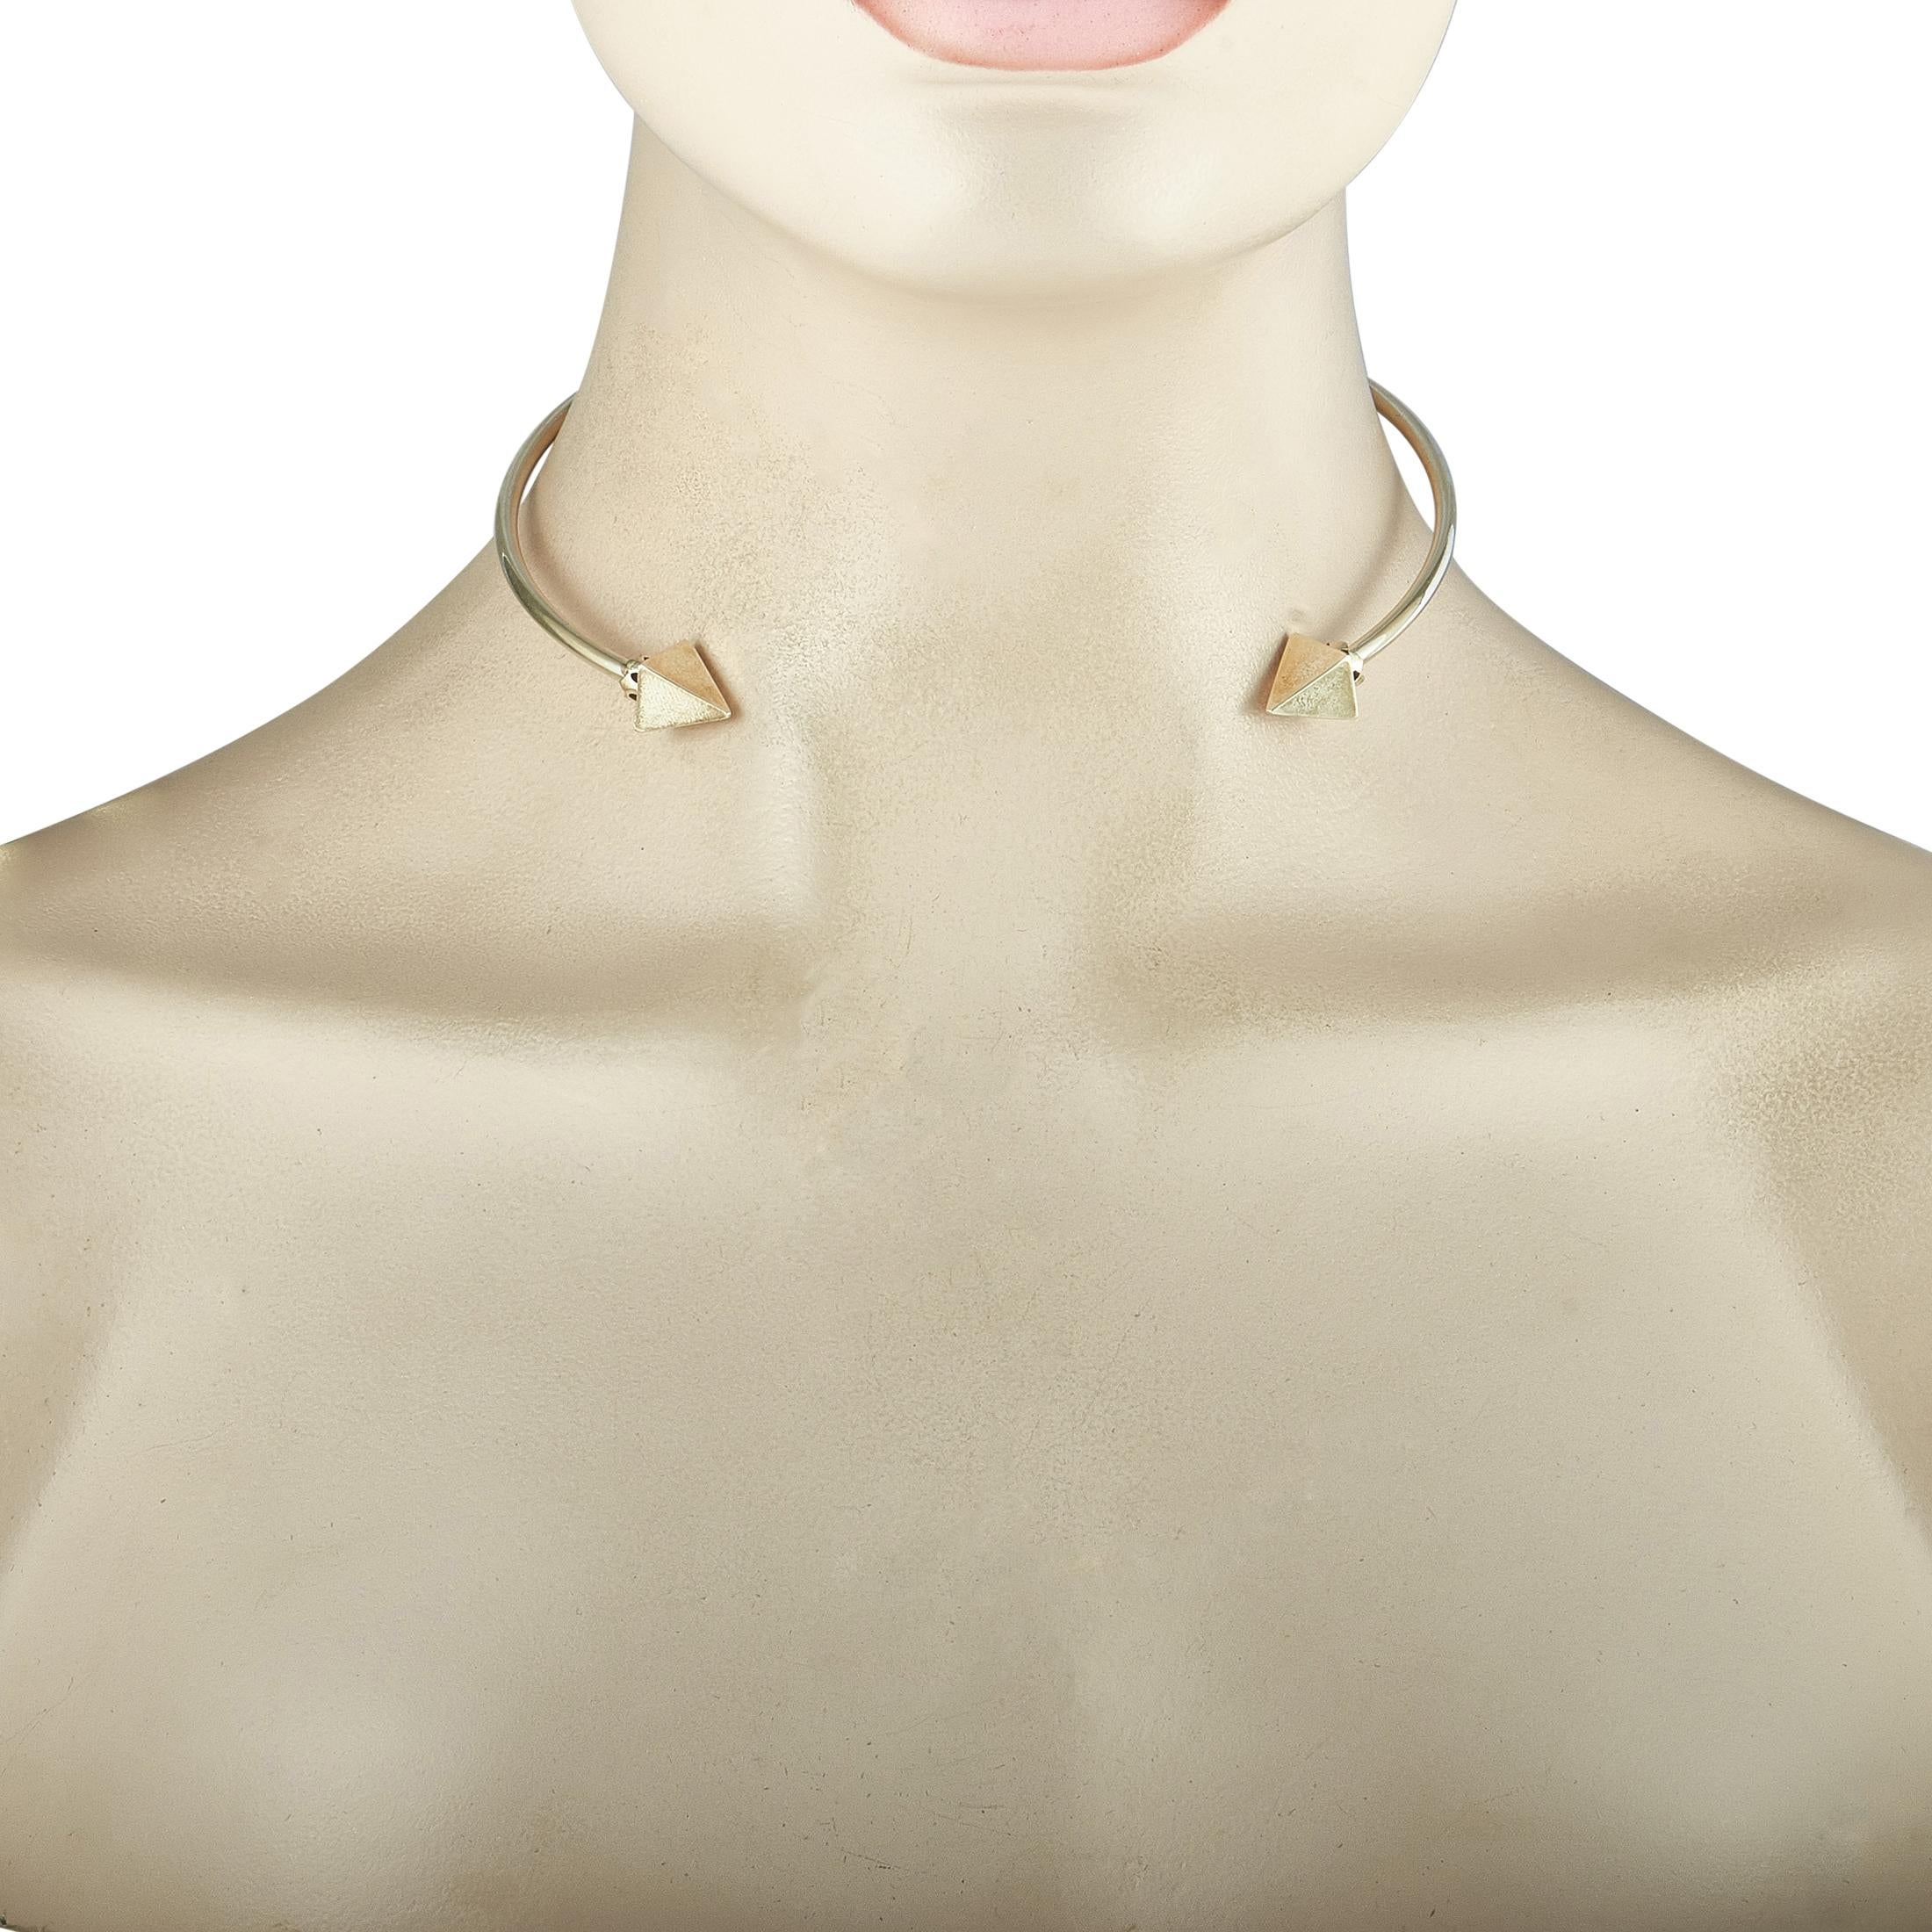 This King Baby choker necklace is crafted from sterling silver and weighs 34.8 grams, measuring 14” in length.

The necklace is offered in brand new condition and includes the manufacturer’s pouch.